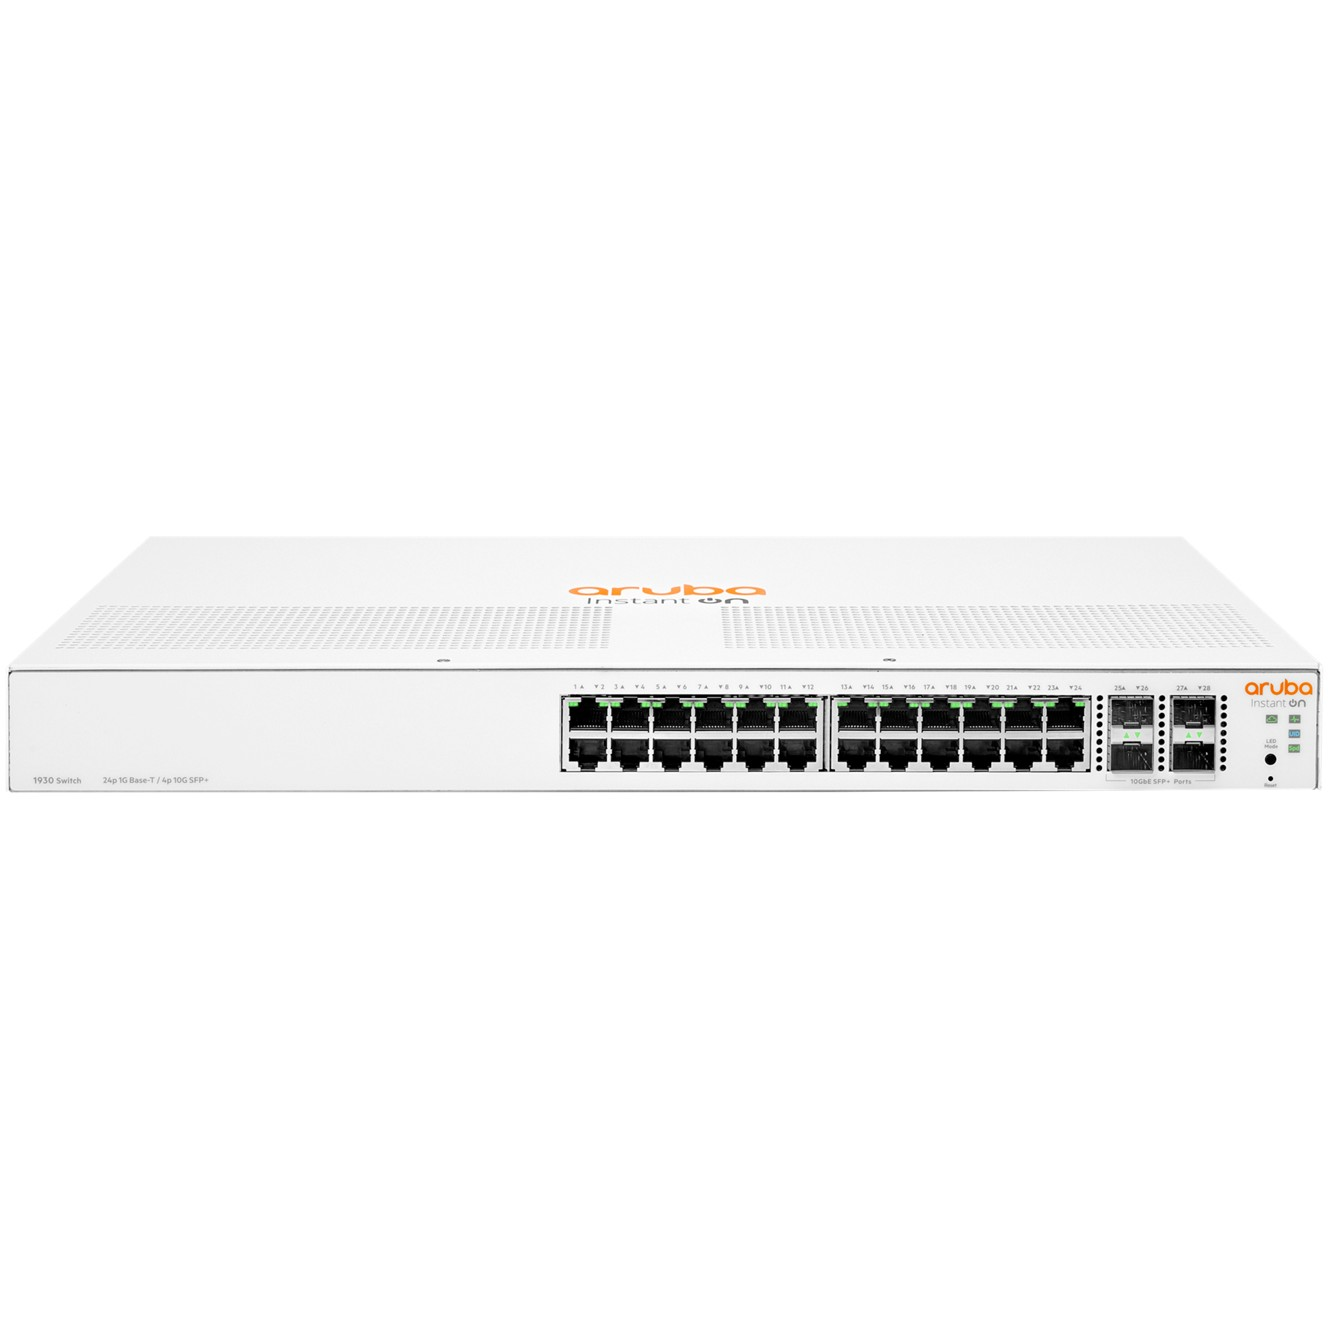 On RM M HPE Instant PoE managed Enterprise HP 4SFP+ 1930 Switches 195W